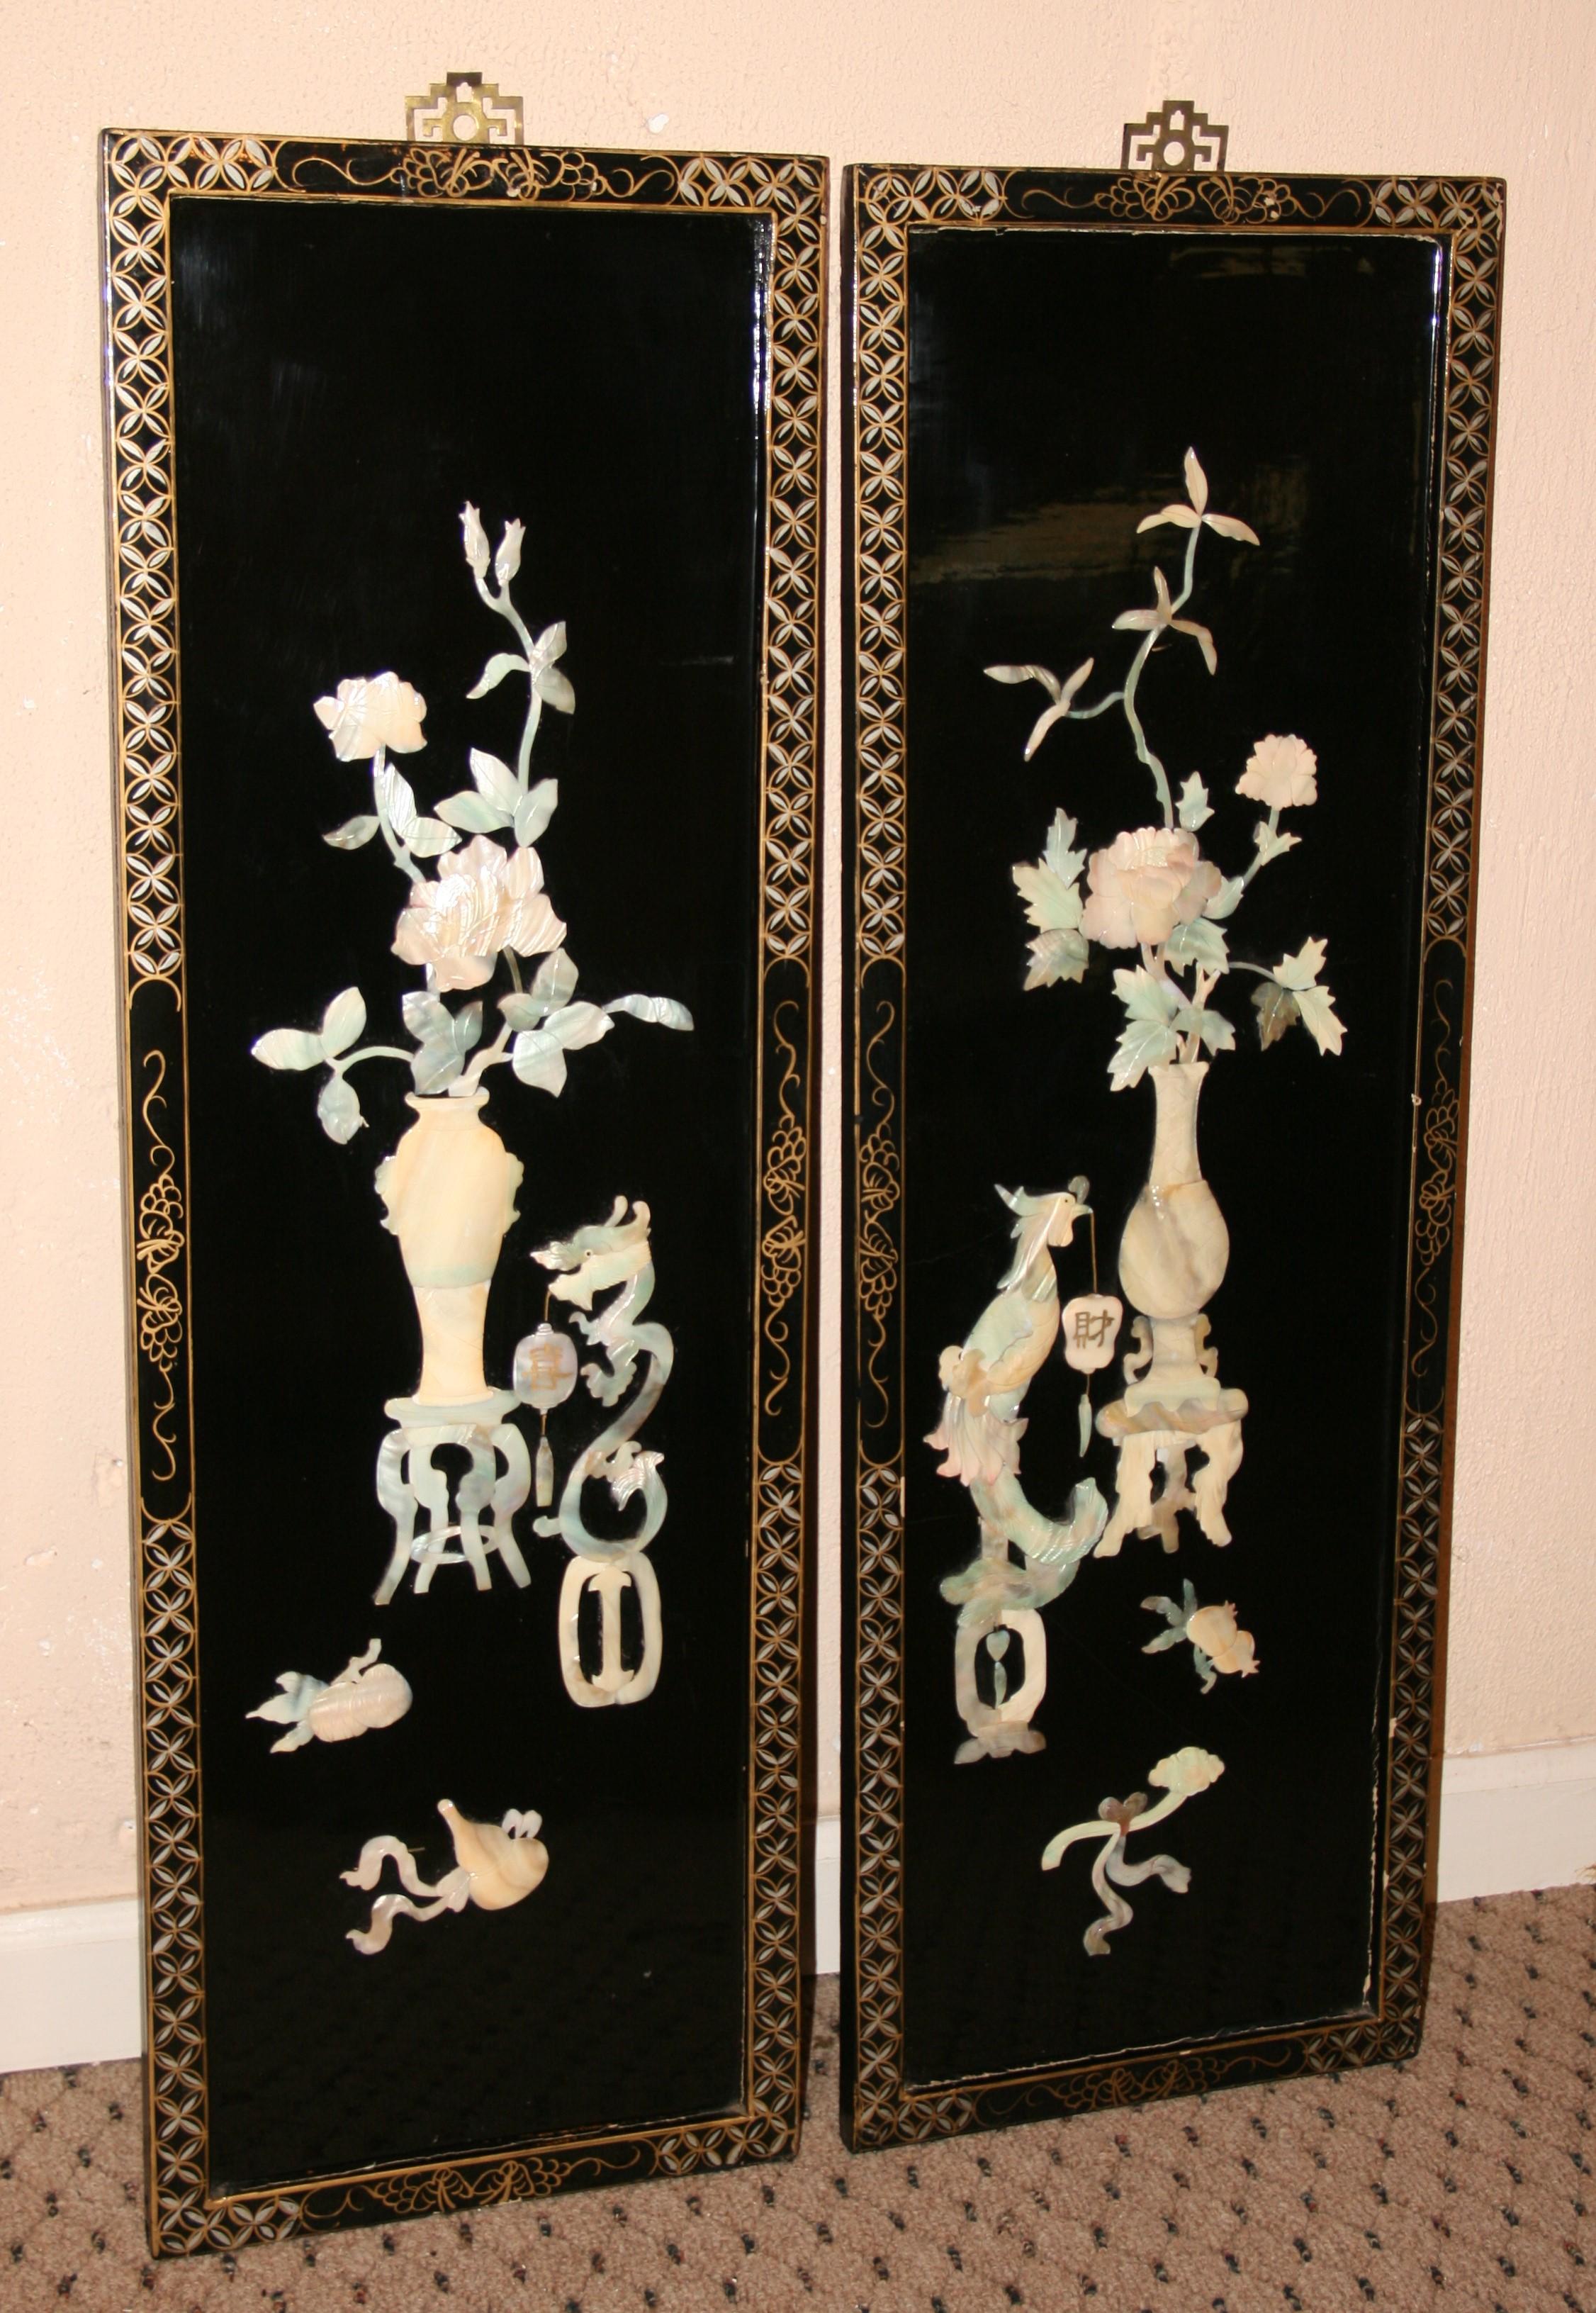 3-1059 Pair hand carved soapstone panels.
Each panel 12x36